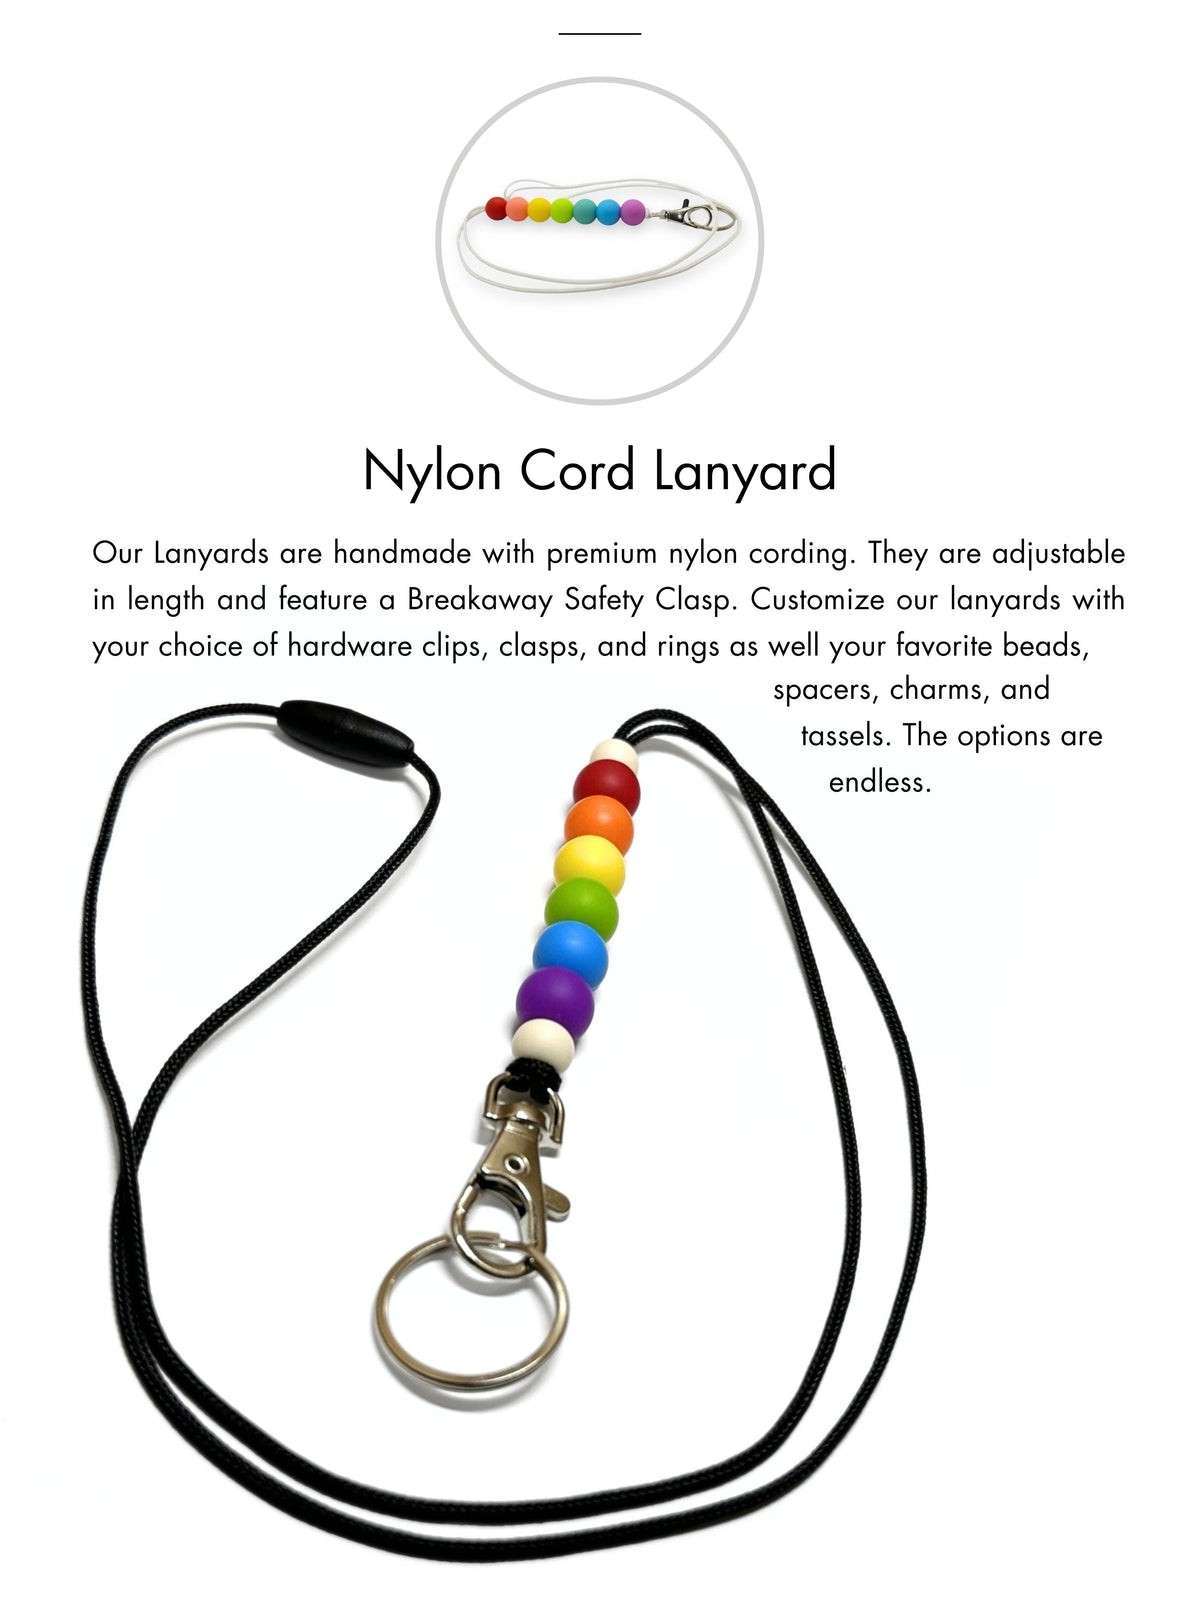 Nylon Cord Lanyard with Premium 2mm Soft Satin Cord and adjustable length with breakaway clasp